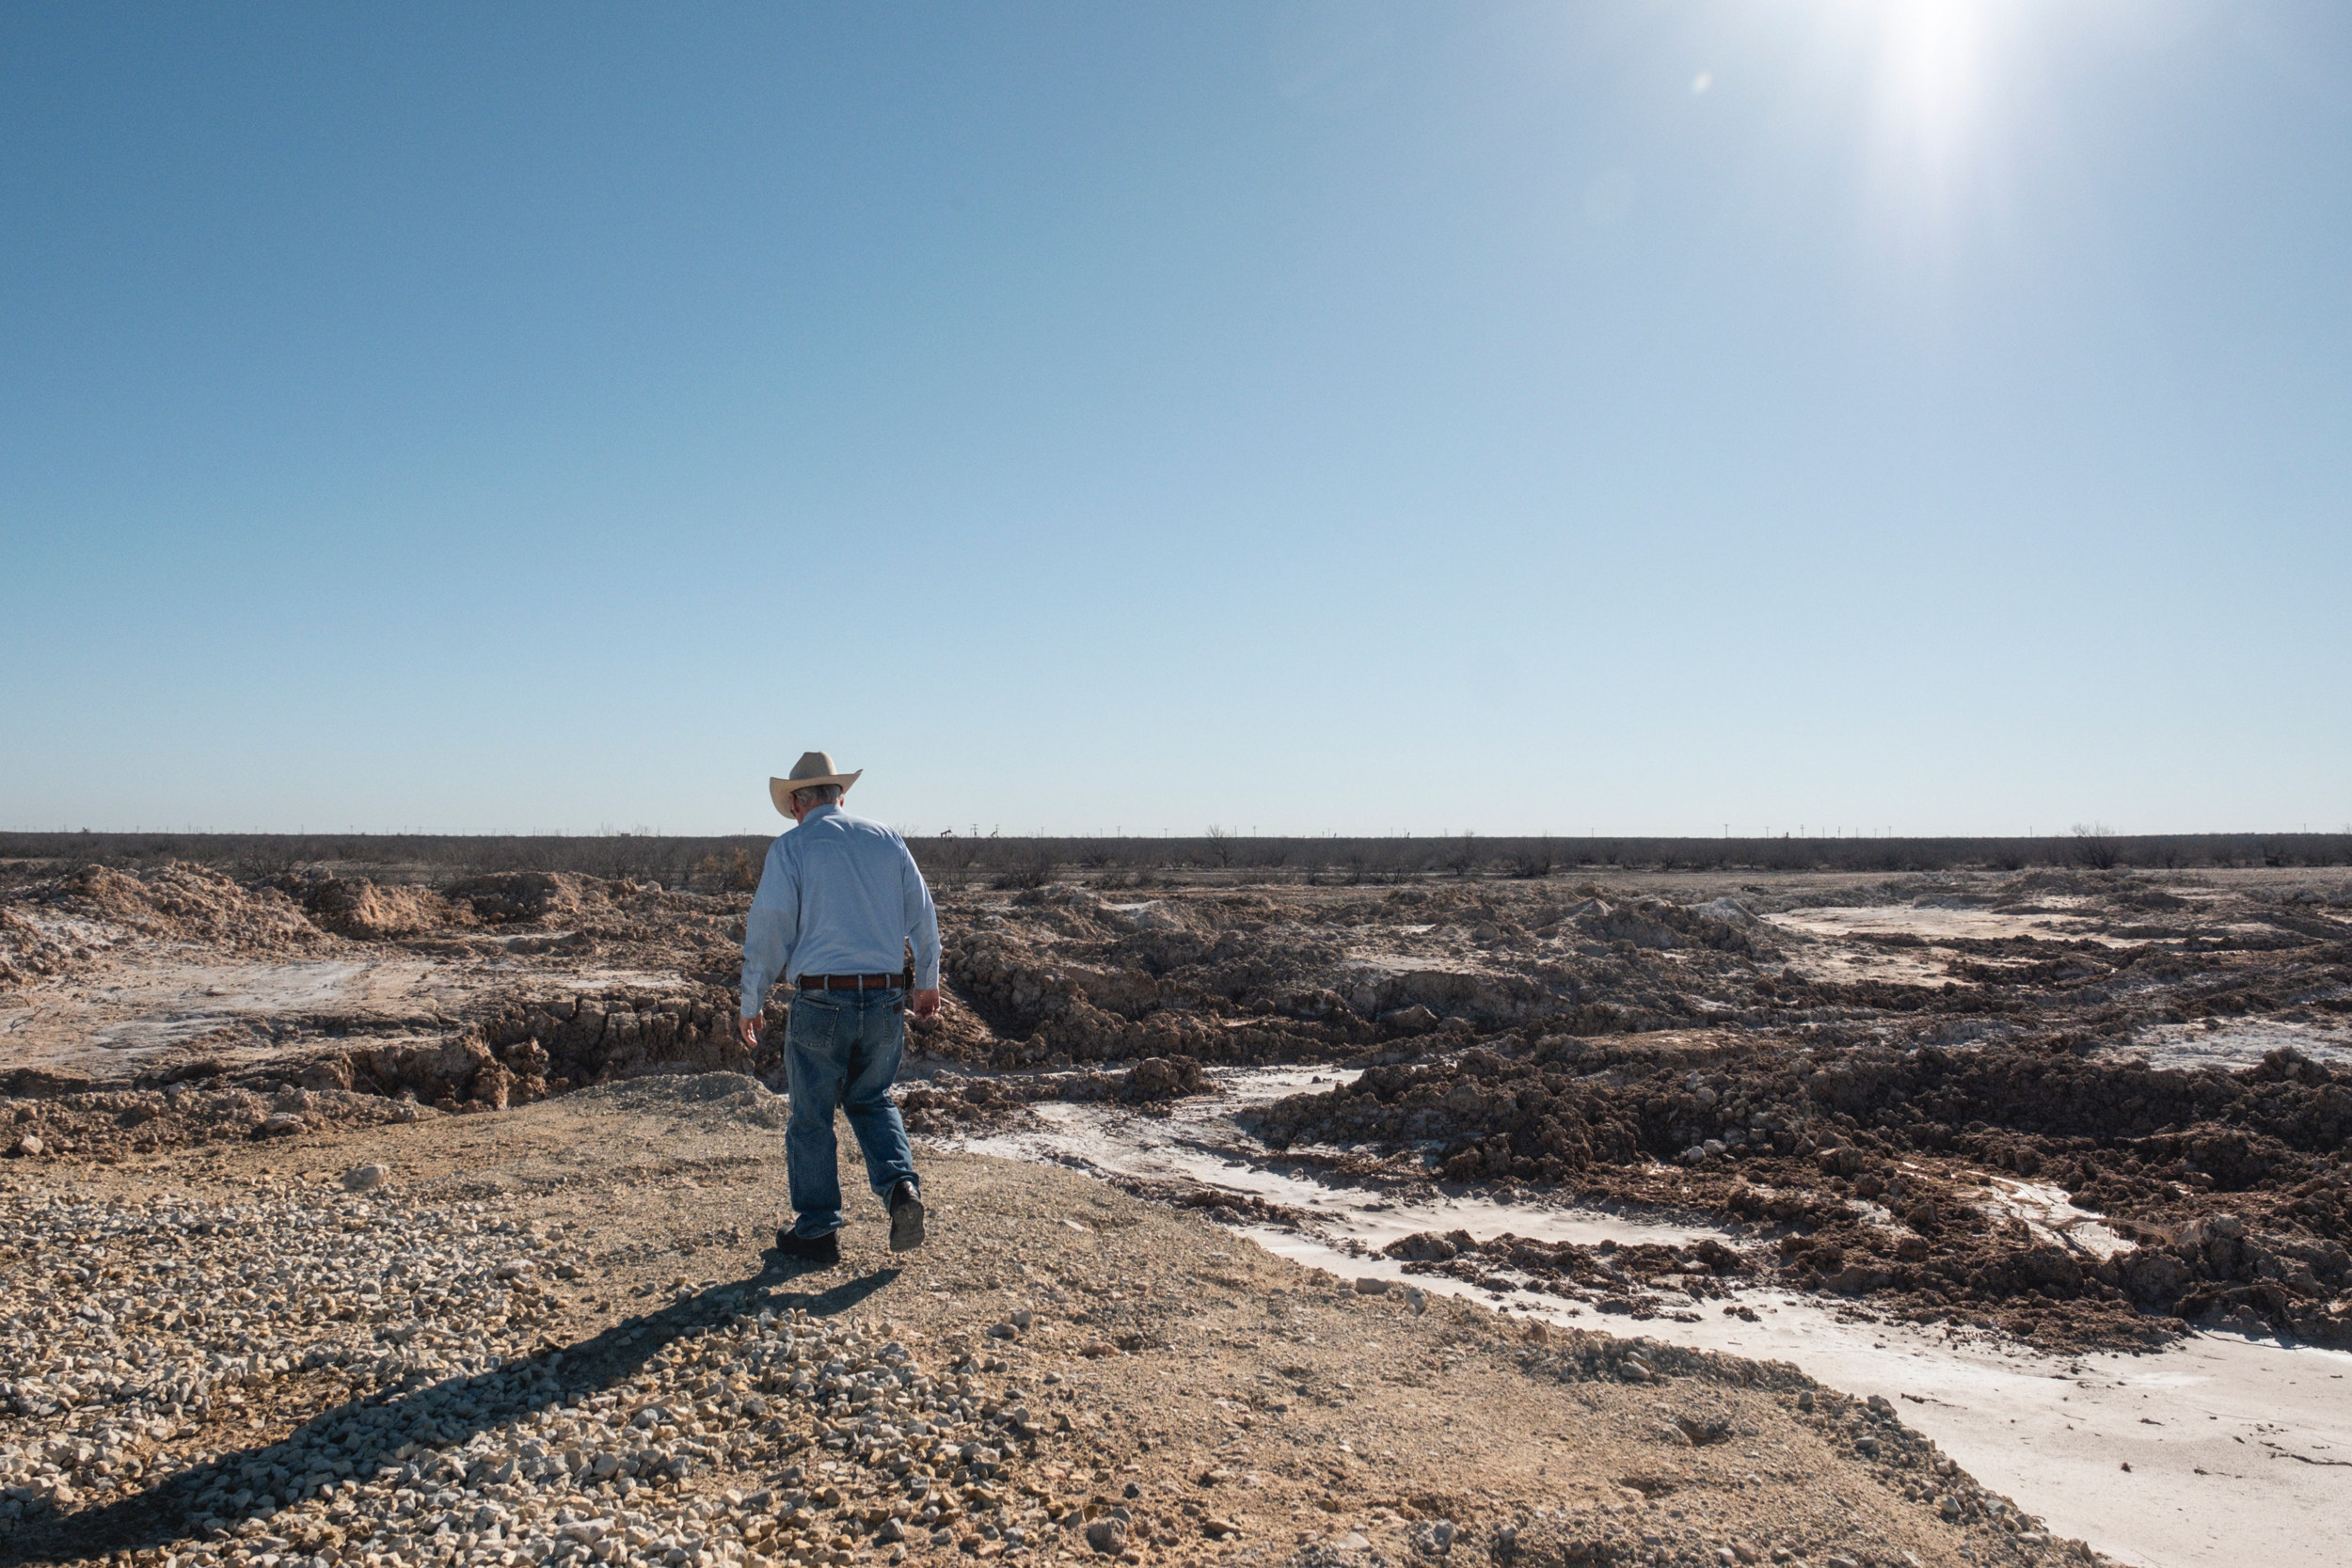 Bill Wight walks on his property, ravaged by rupturing salt water from an abandoned well. Credit: Sarah M. Vasquez/The Texas Tribune